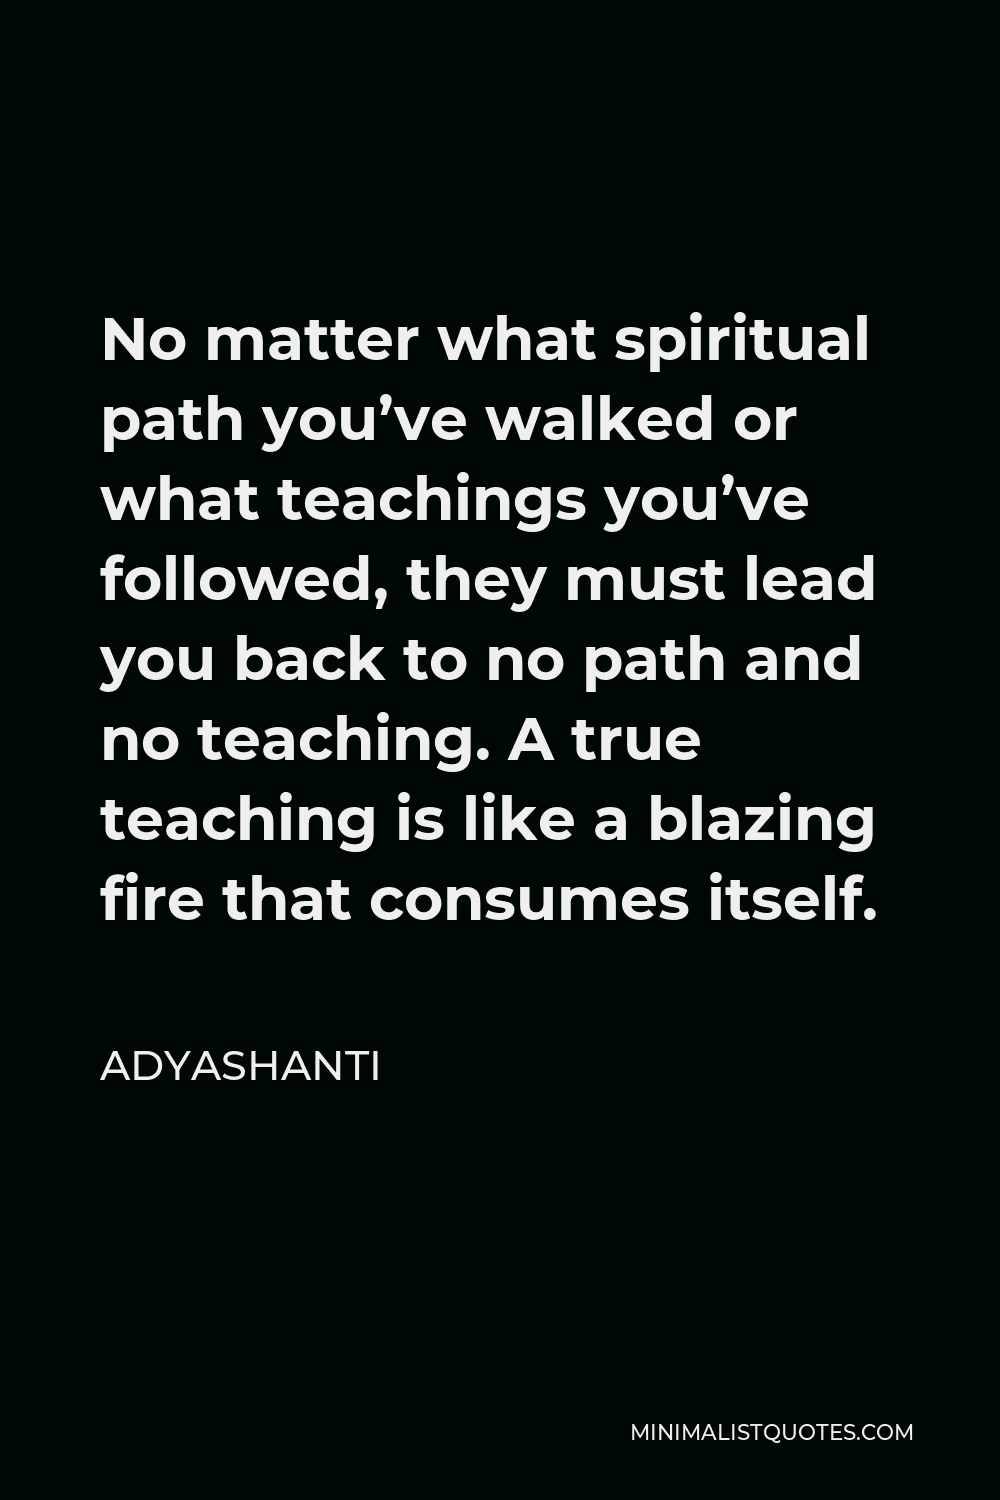 Adyashanti Quote - No matter what spiritual path you’ve walked or what teachings you’ve followed, they must lead you back to no path and no teaching. A true teaching is like a blazing fire that consumes itself.